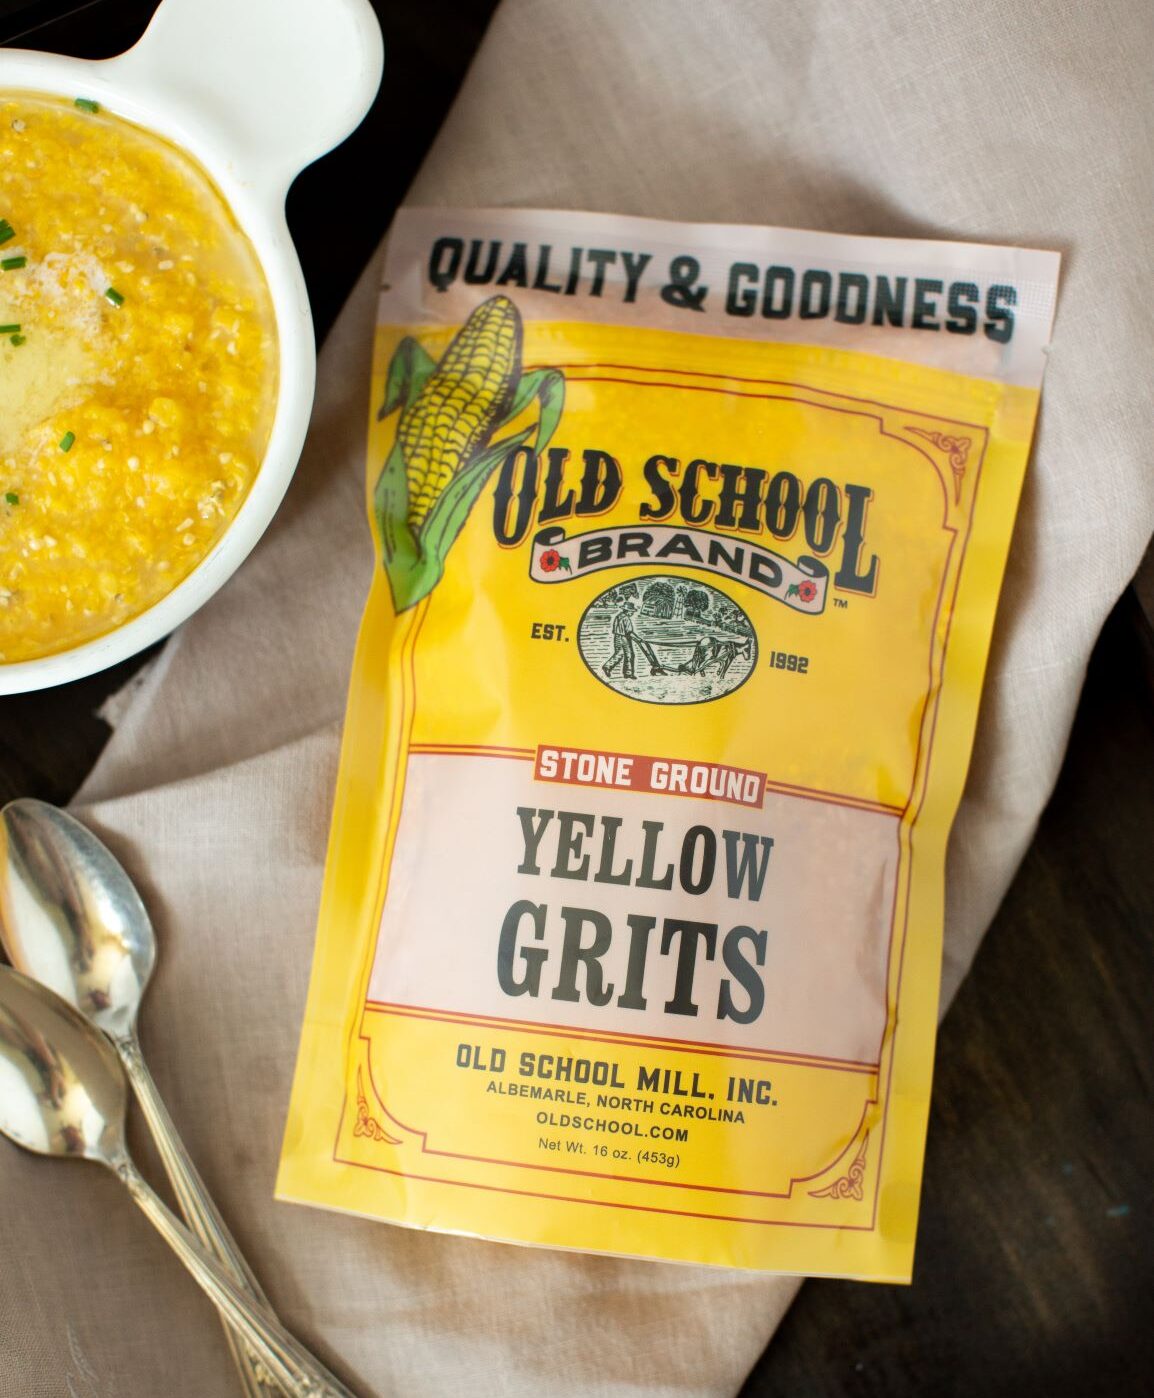 Stone Ground, Yellow Grits, 1lbs. - Old School Mill, Inc.